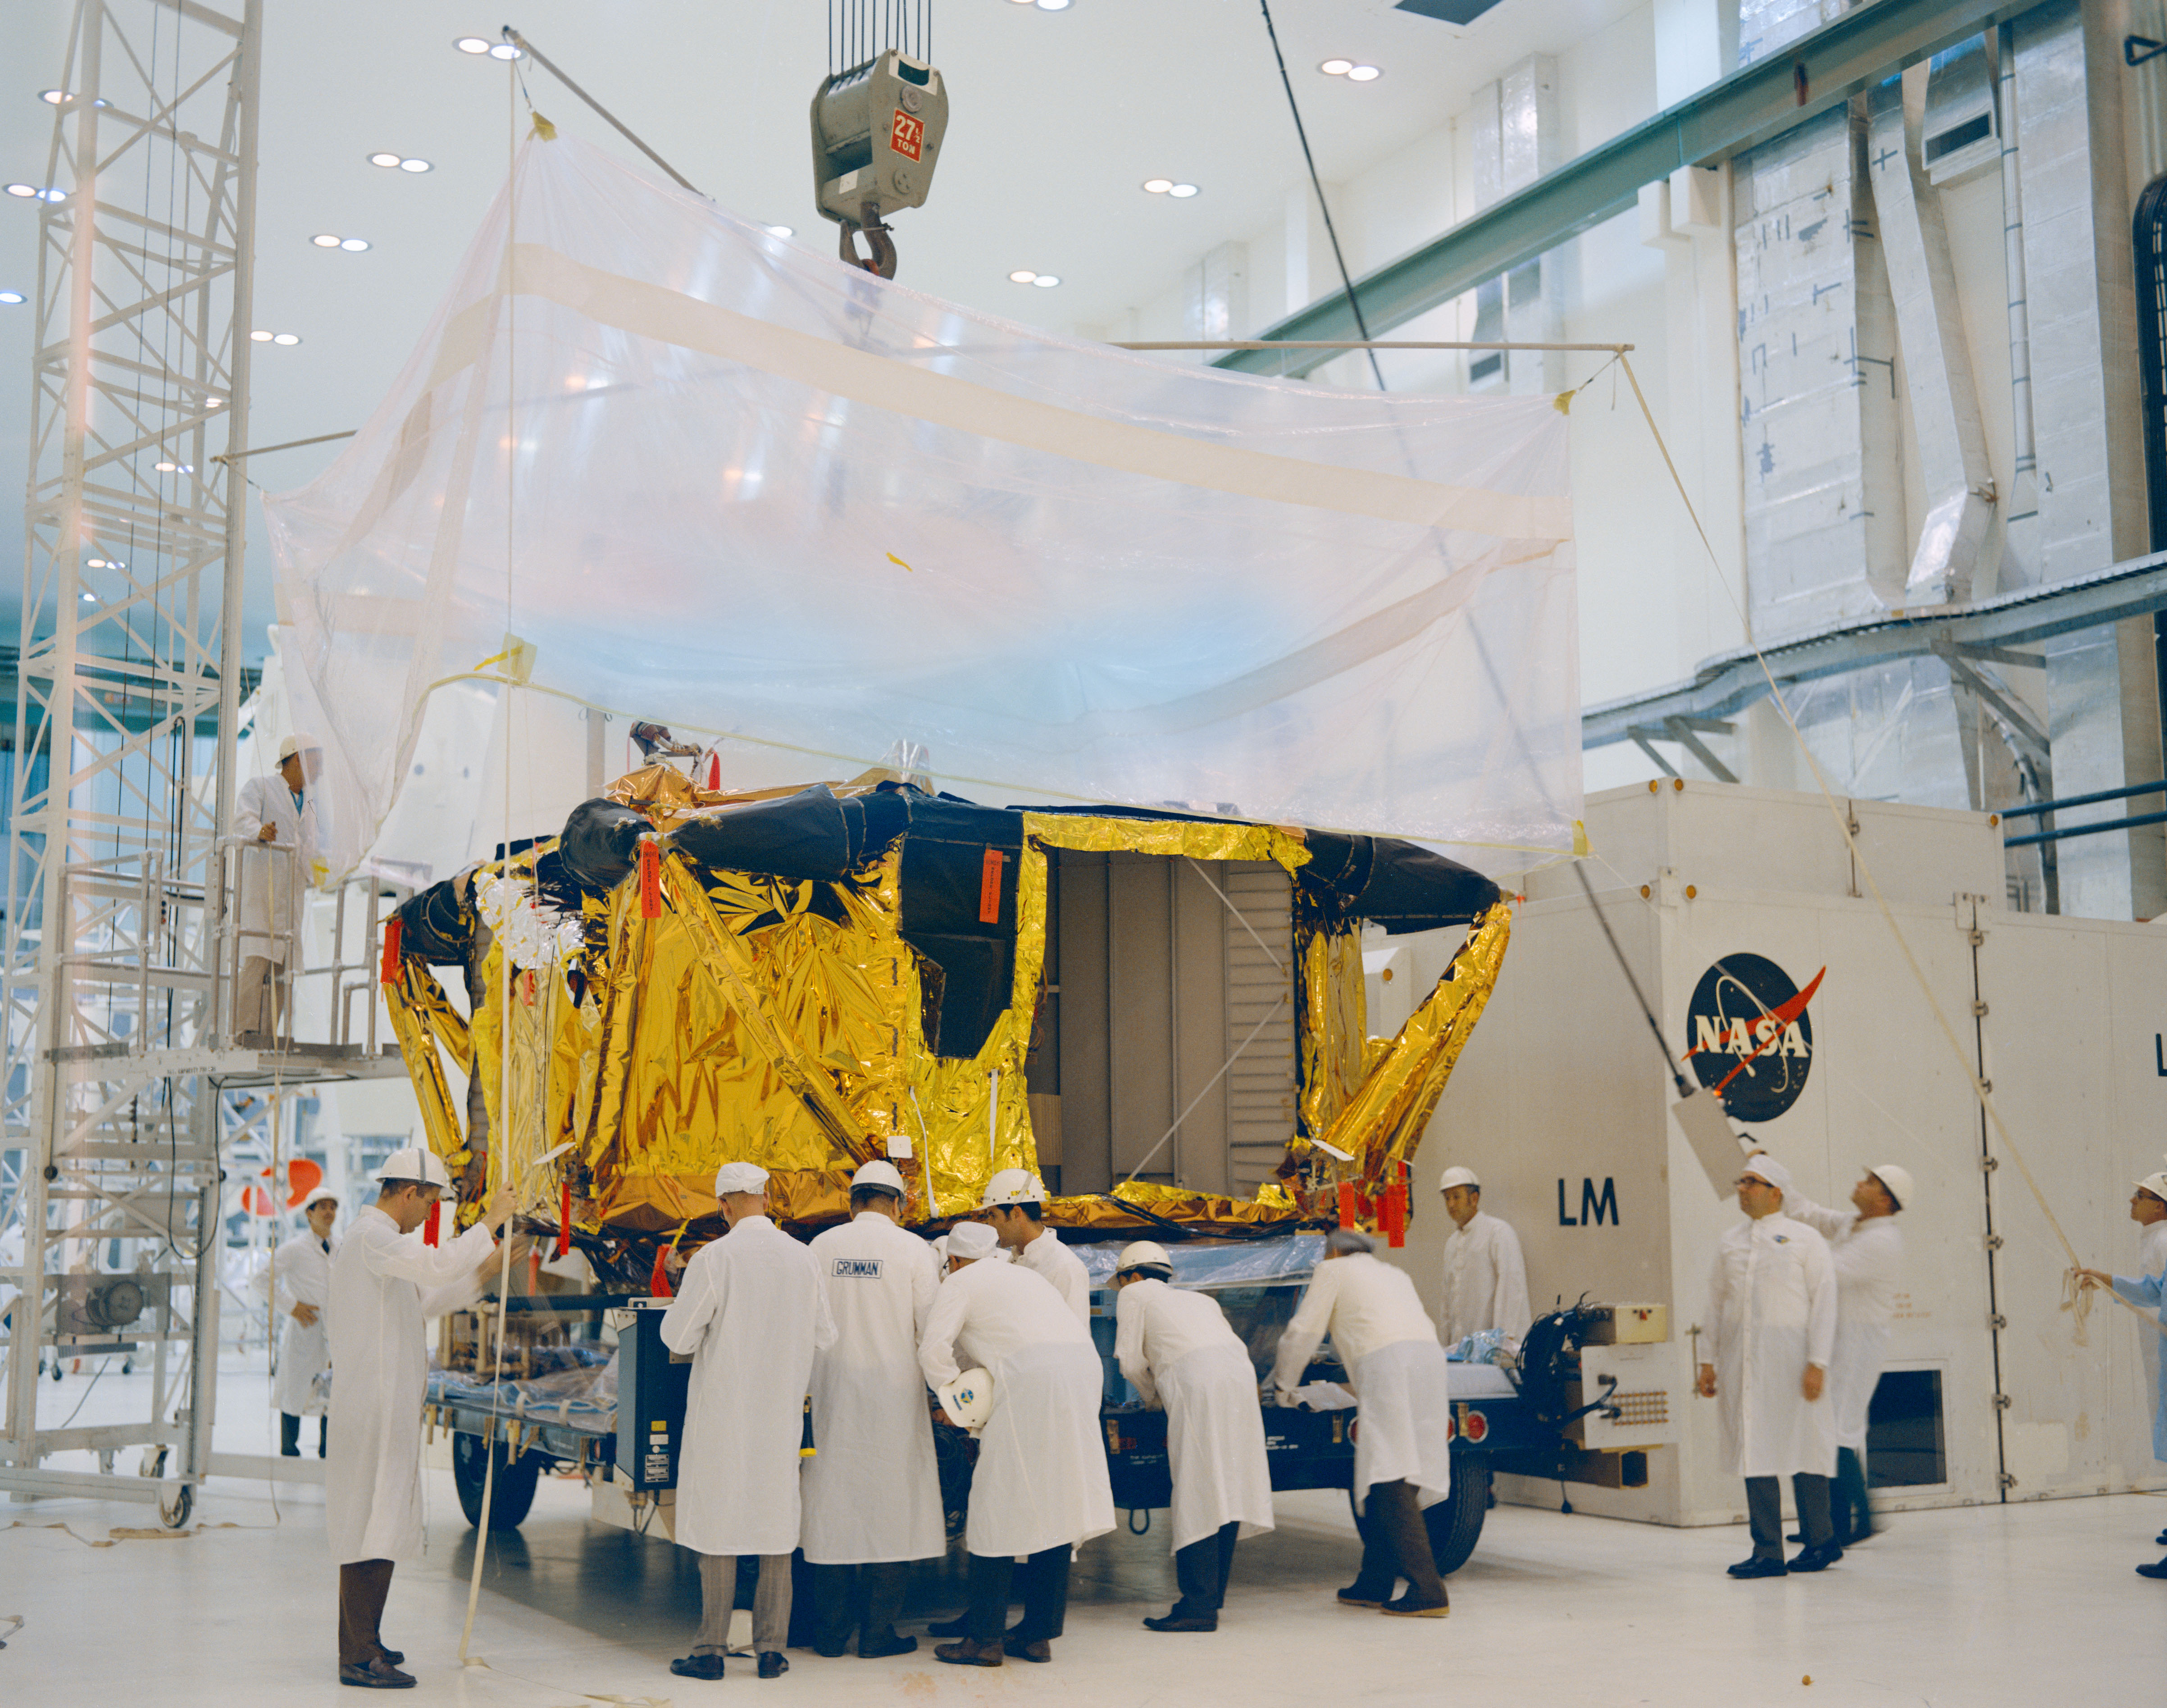 At NASA's Kennedy Space Center (KSC) in Florida, workers unwrap the Apollo 12 Lunar Module (LM) descent stage shortly after its arrival in the Manned Spacecraft Operations Building